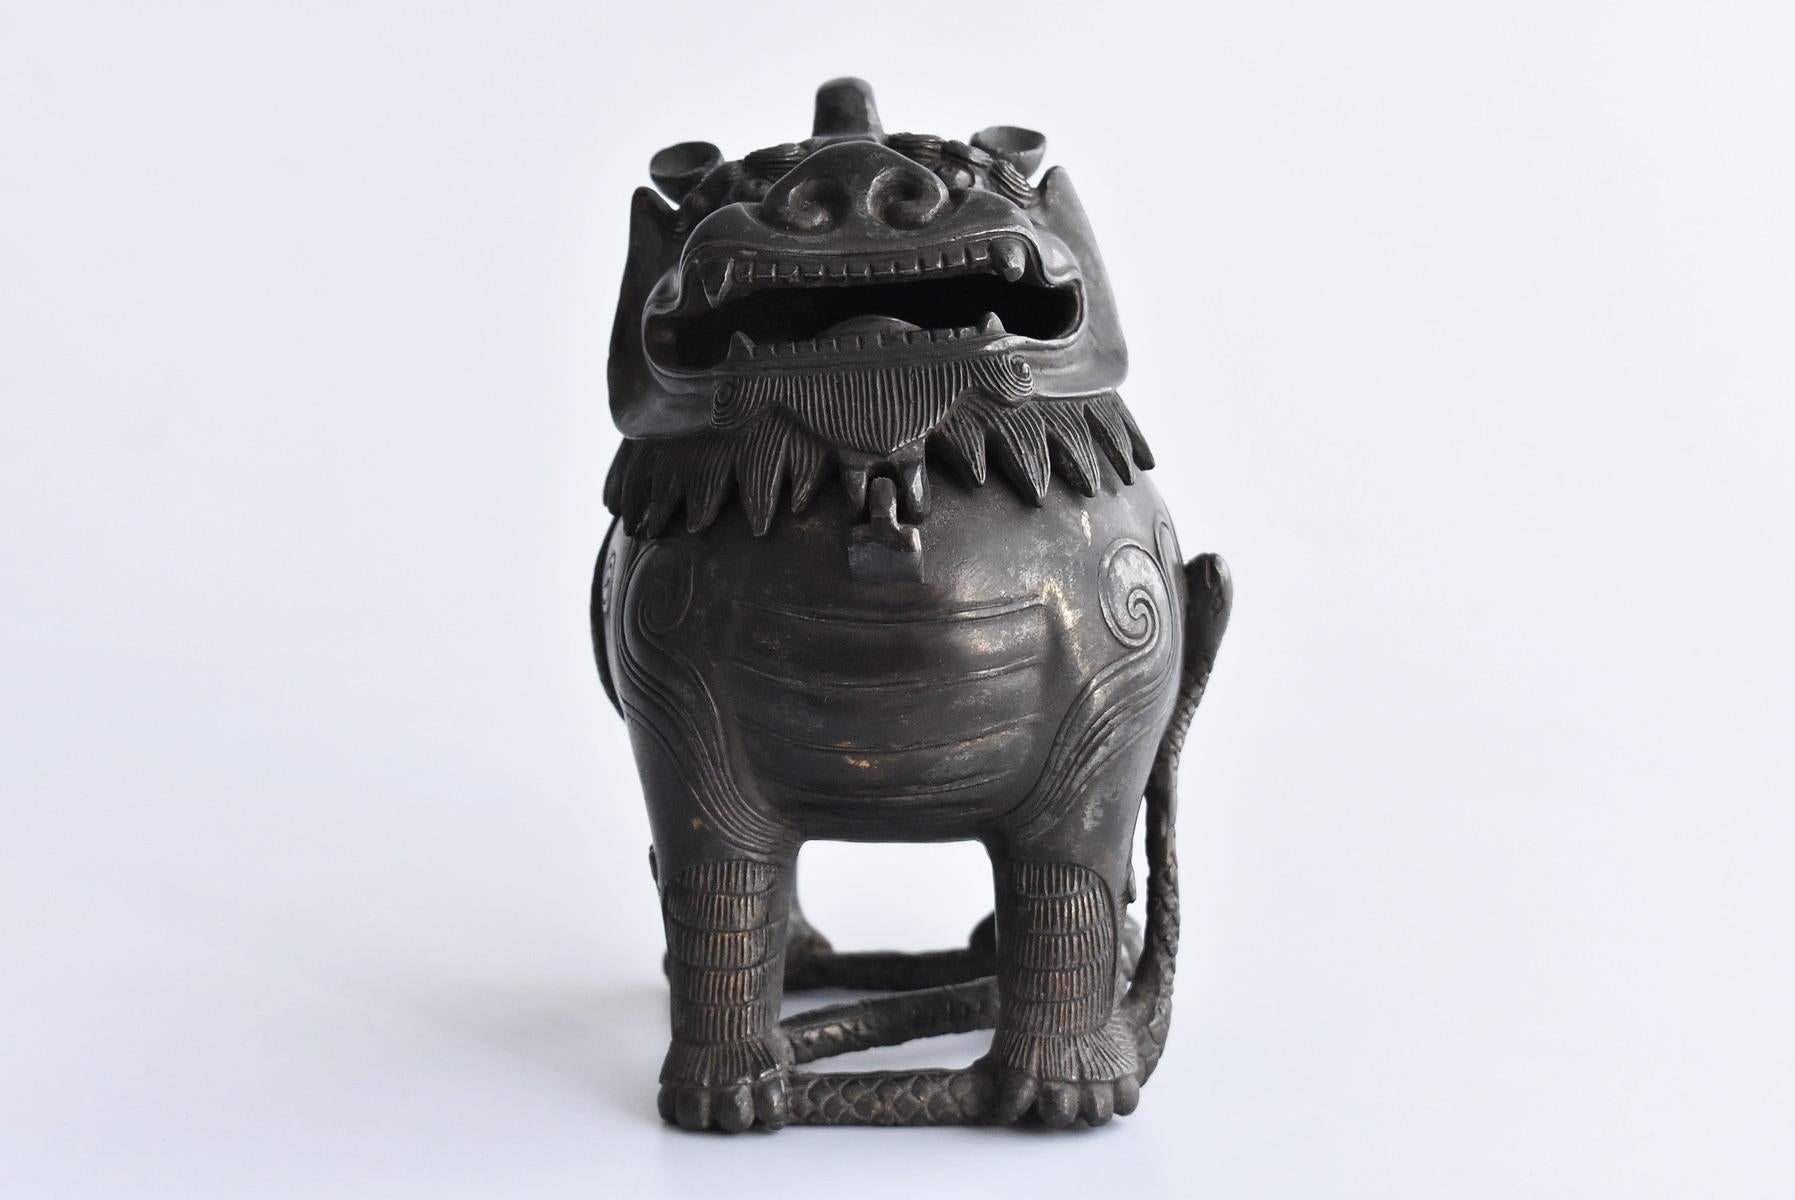 Arts and Crafts Old Japanese Copperware or Incense Burner in the Shape of a Lion/Carved Figurine